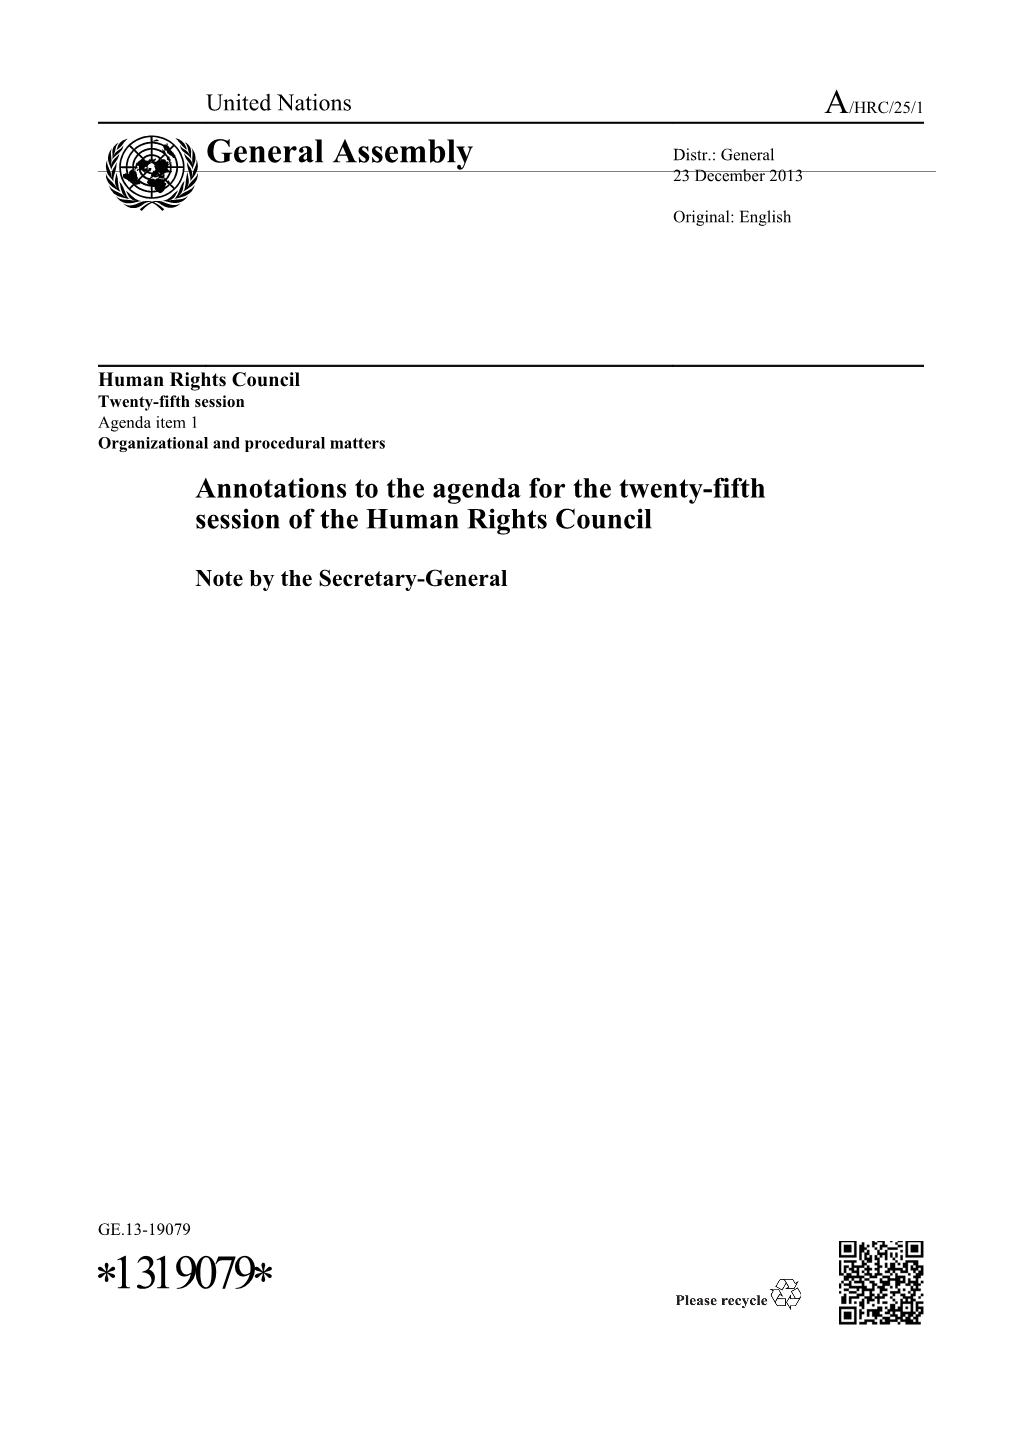 Annotations to the Agenda for the Twenty-Fifth Session of the Human Rights Council